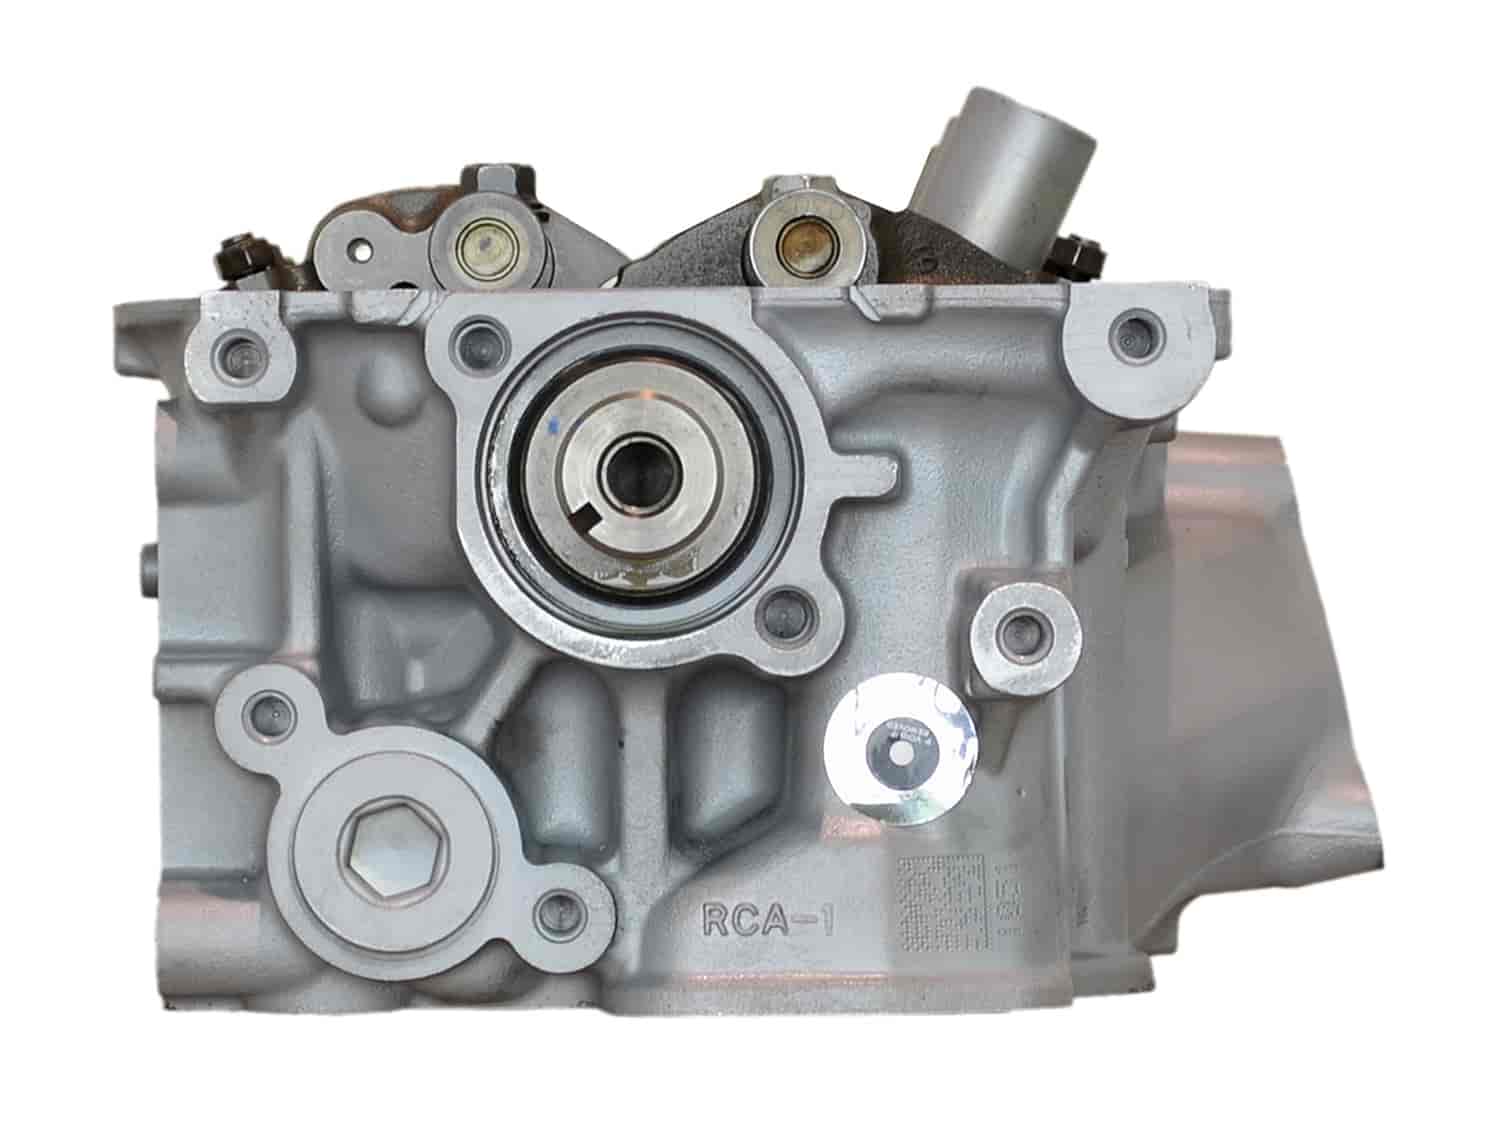 Remanufactured Cylinder Head for 2003-2007 Honda Accord with